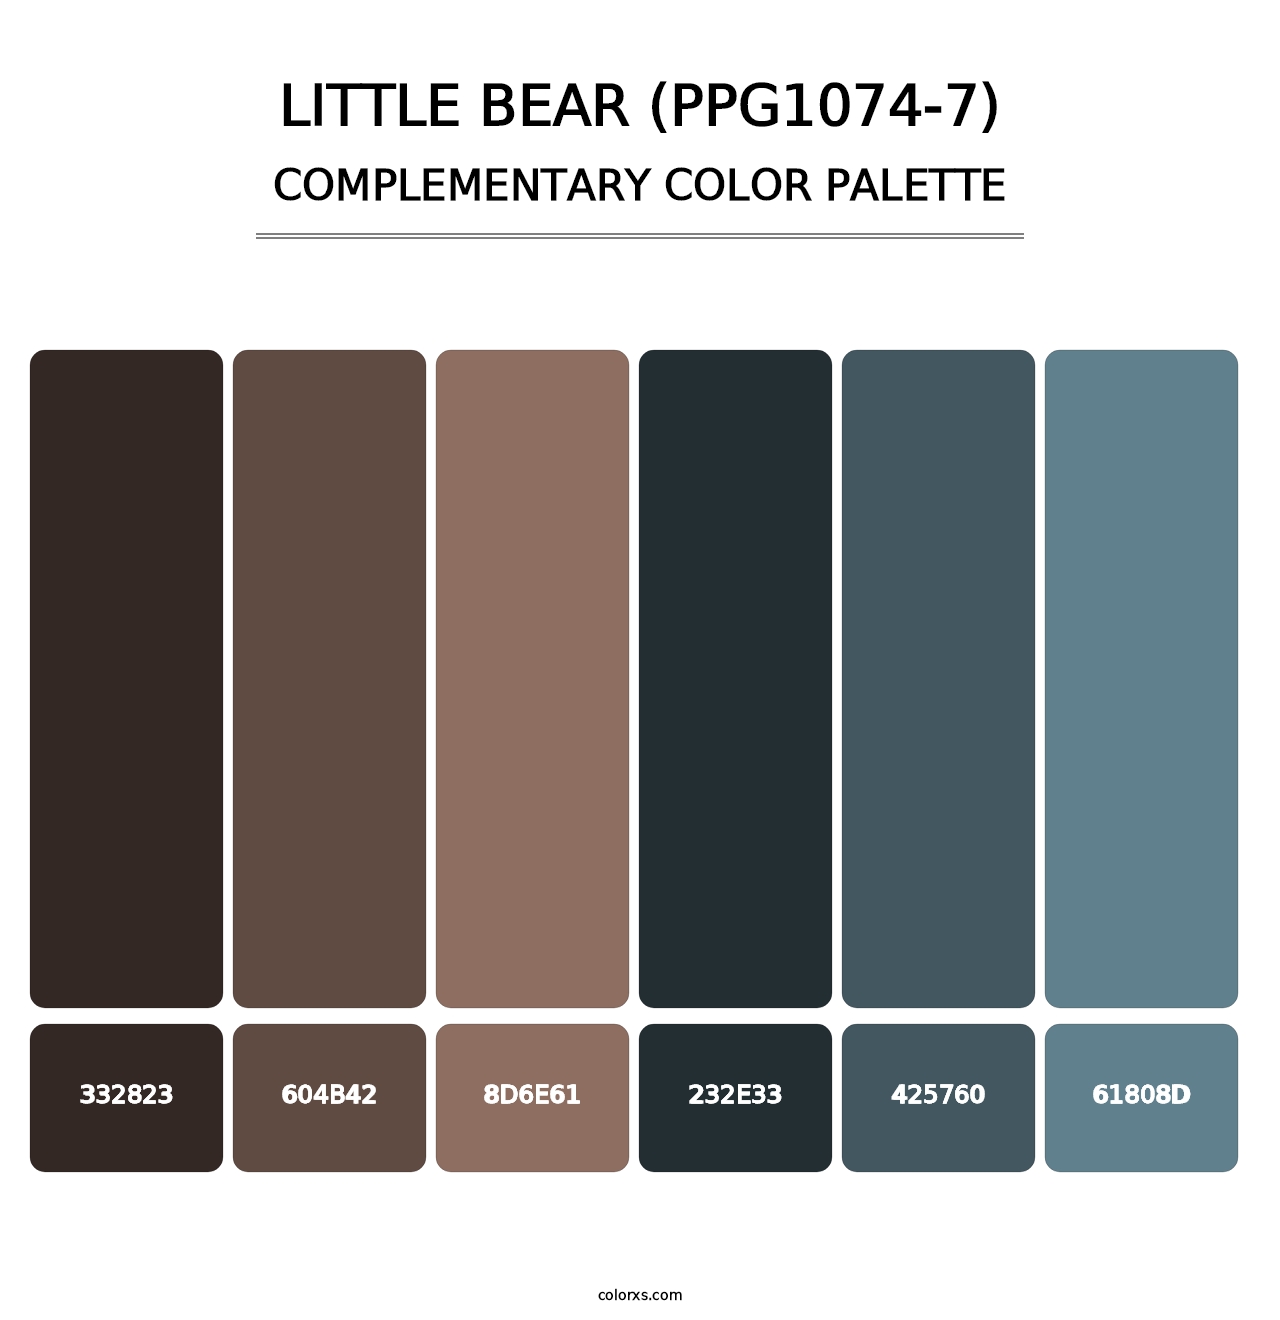 Little Bear (PPG1074-7) - Complementary Color Palette